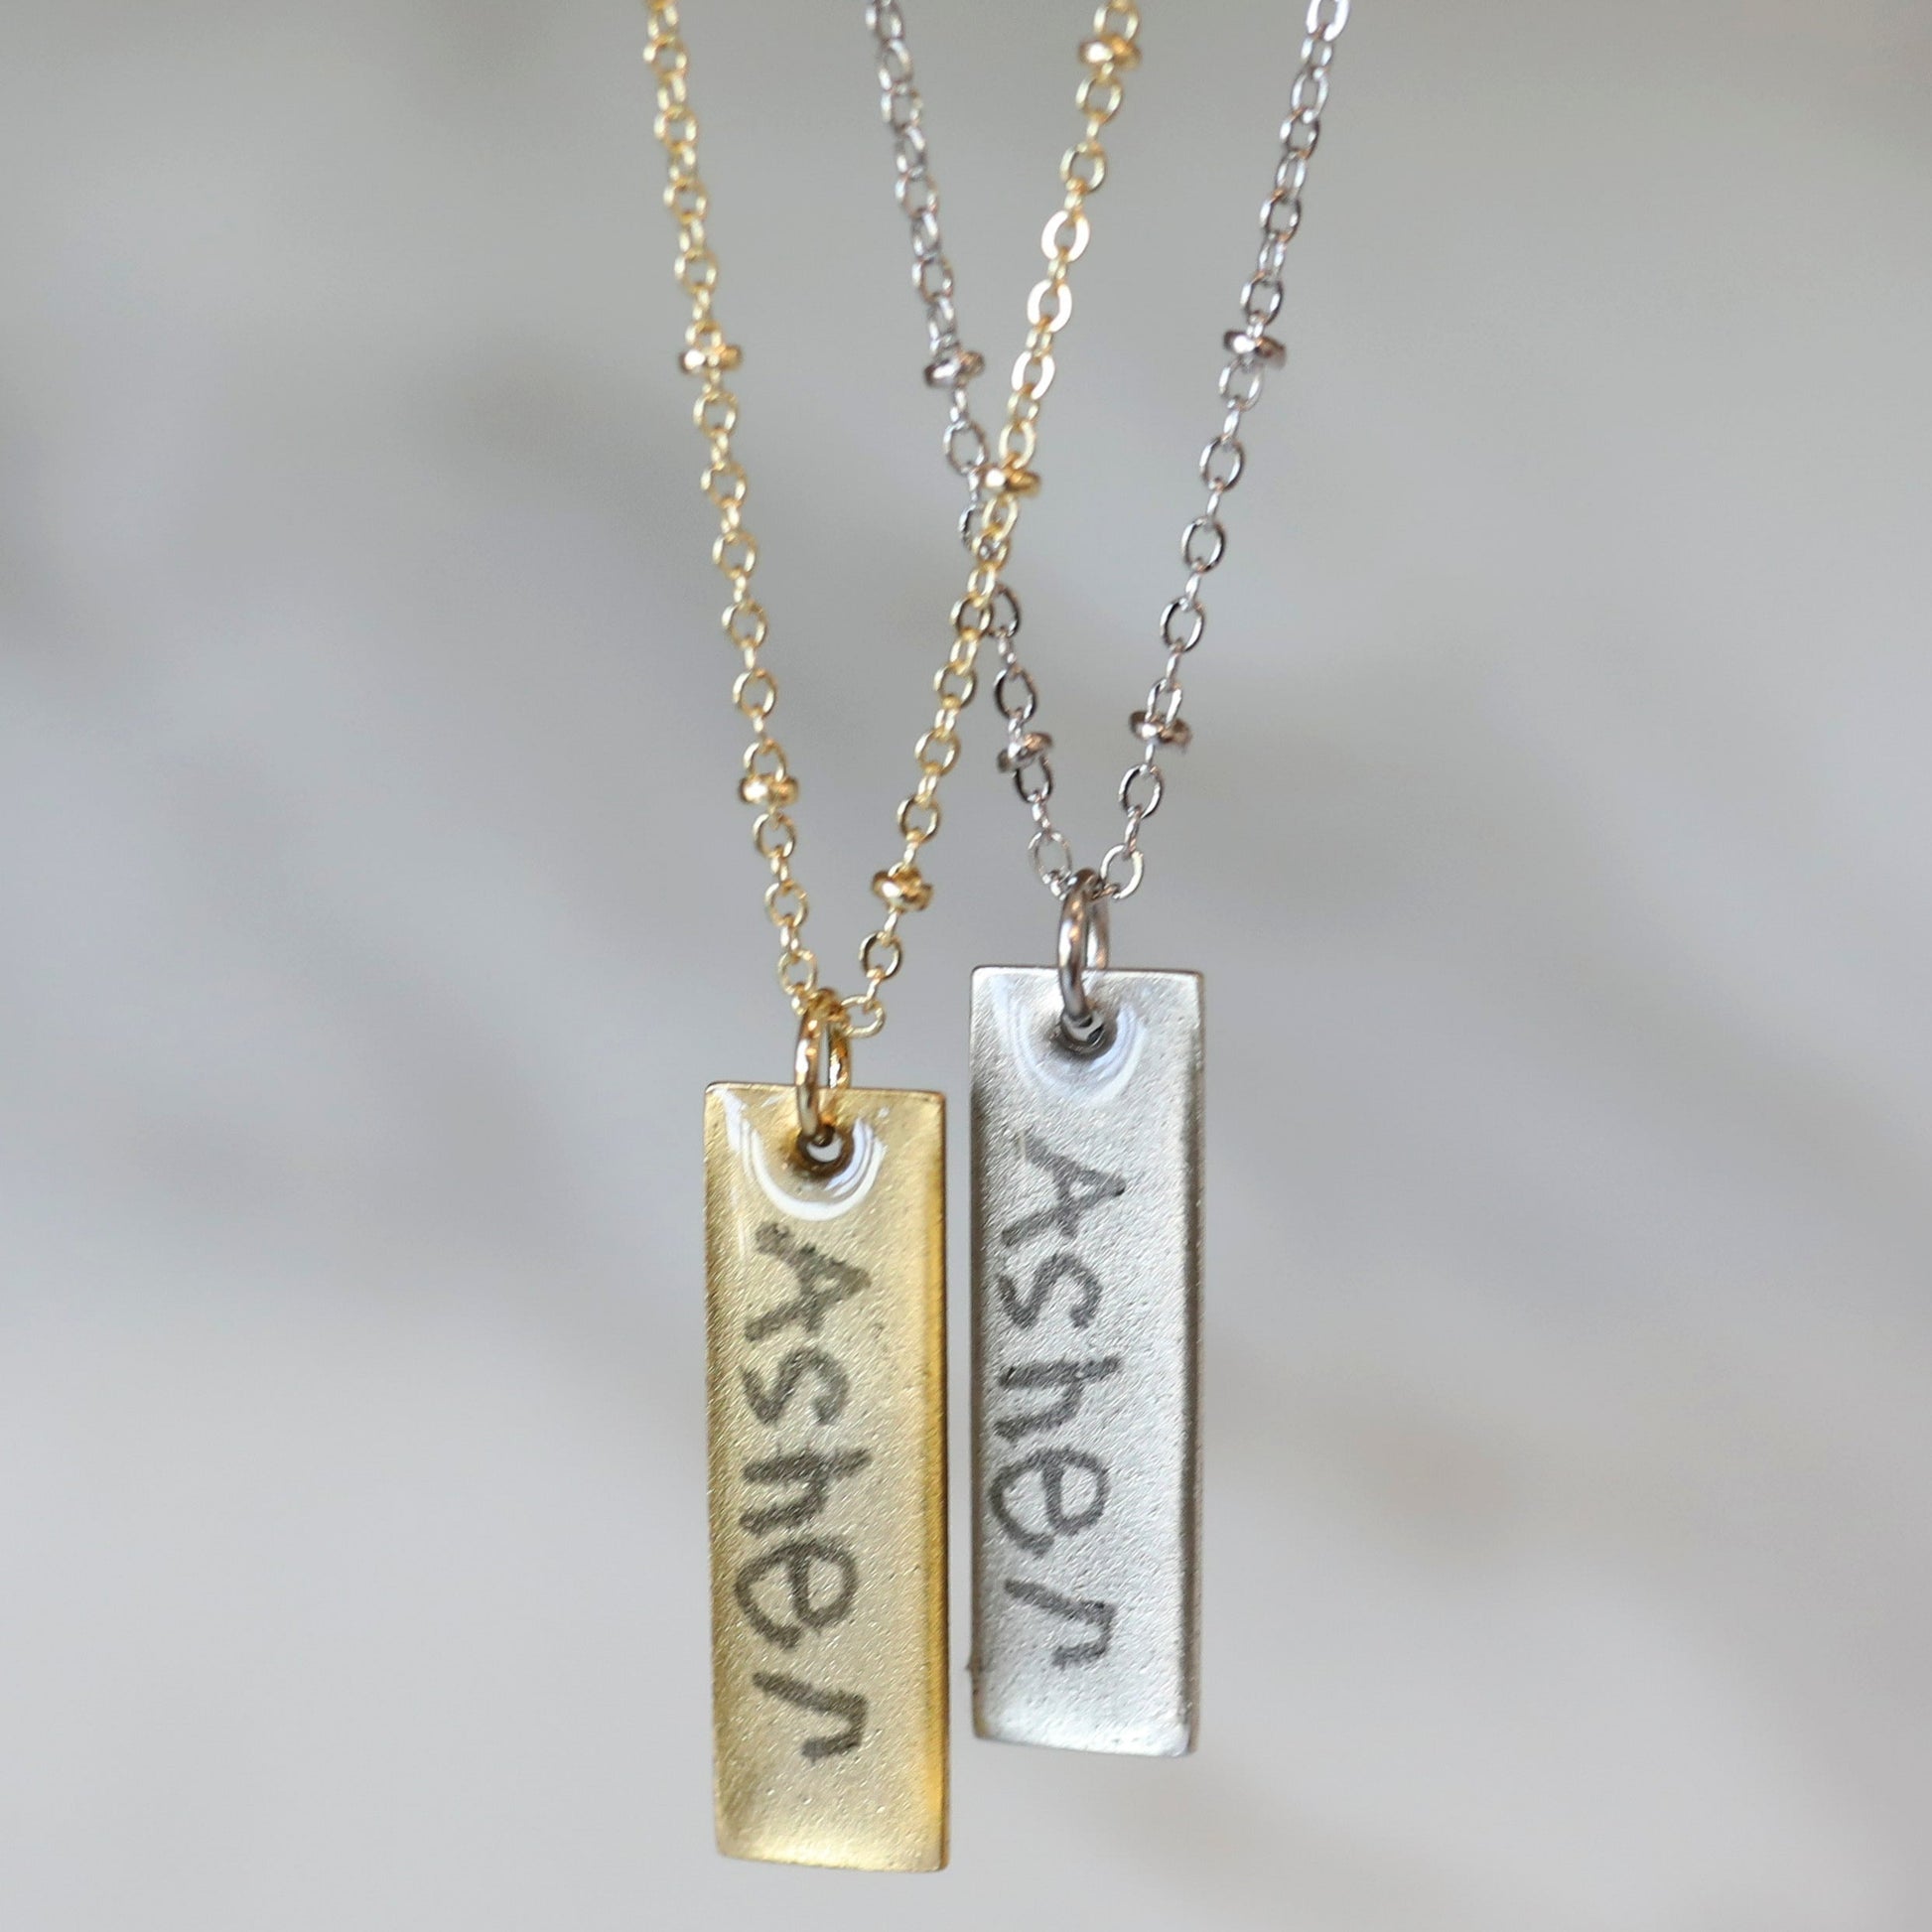 Vertical Bar Handwriting Necklace available in Antique Silver or Gold